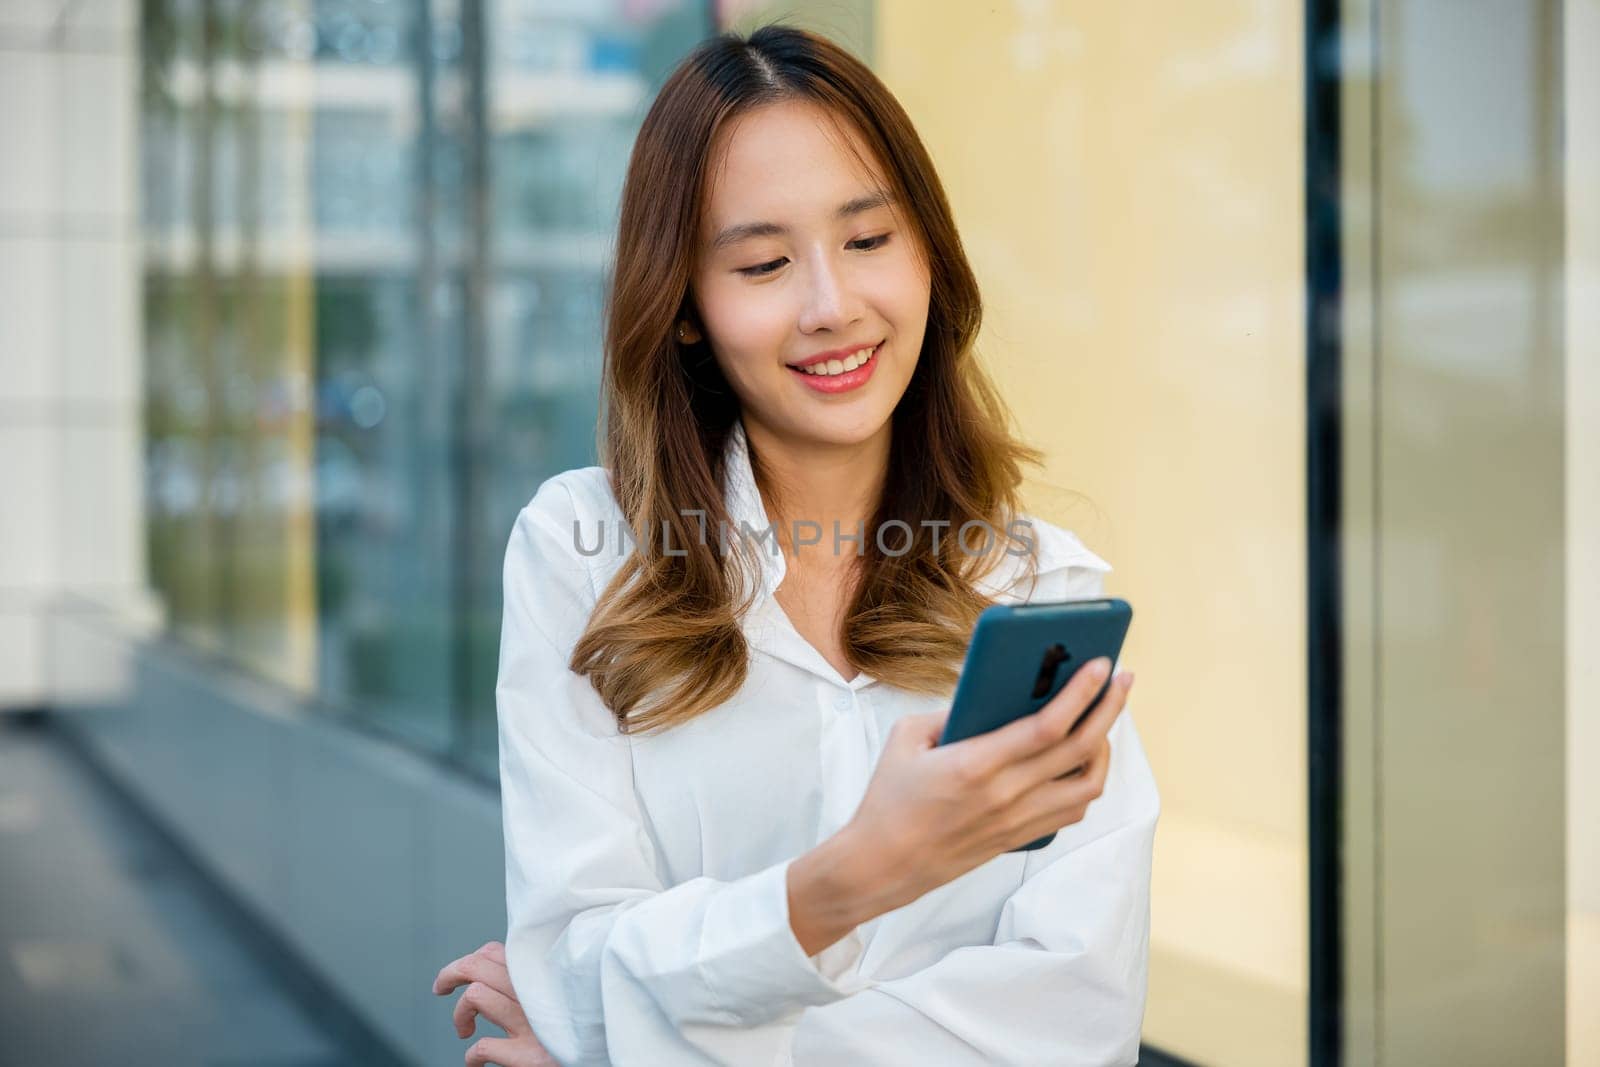 An Asian girl is enjoying the outdoors while using her smartphone. She is swiping and typing on the device. The woman is connected and engaged.